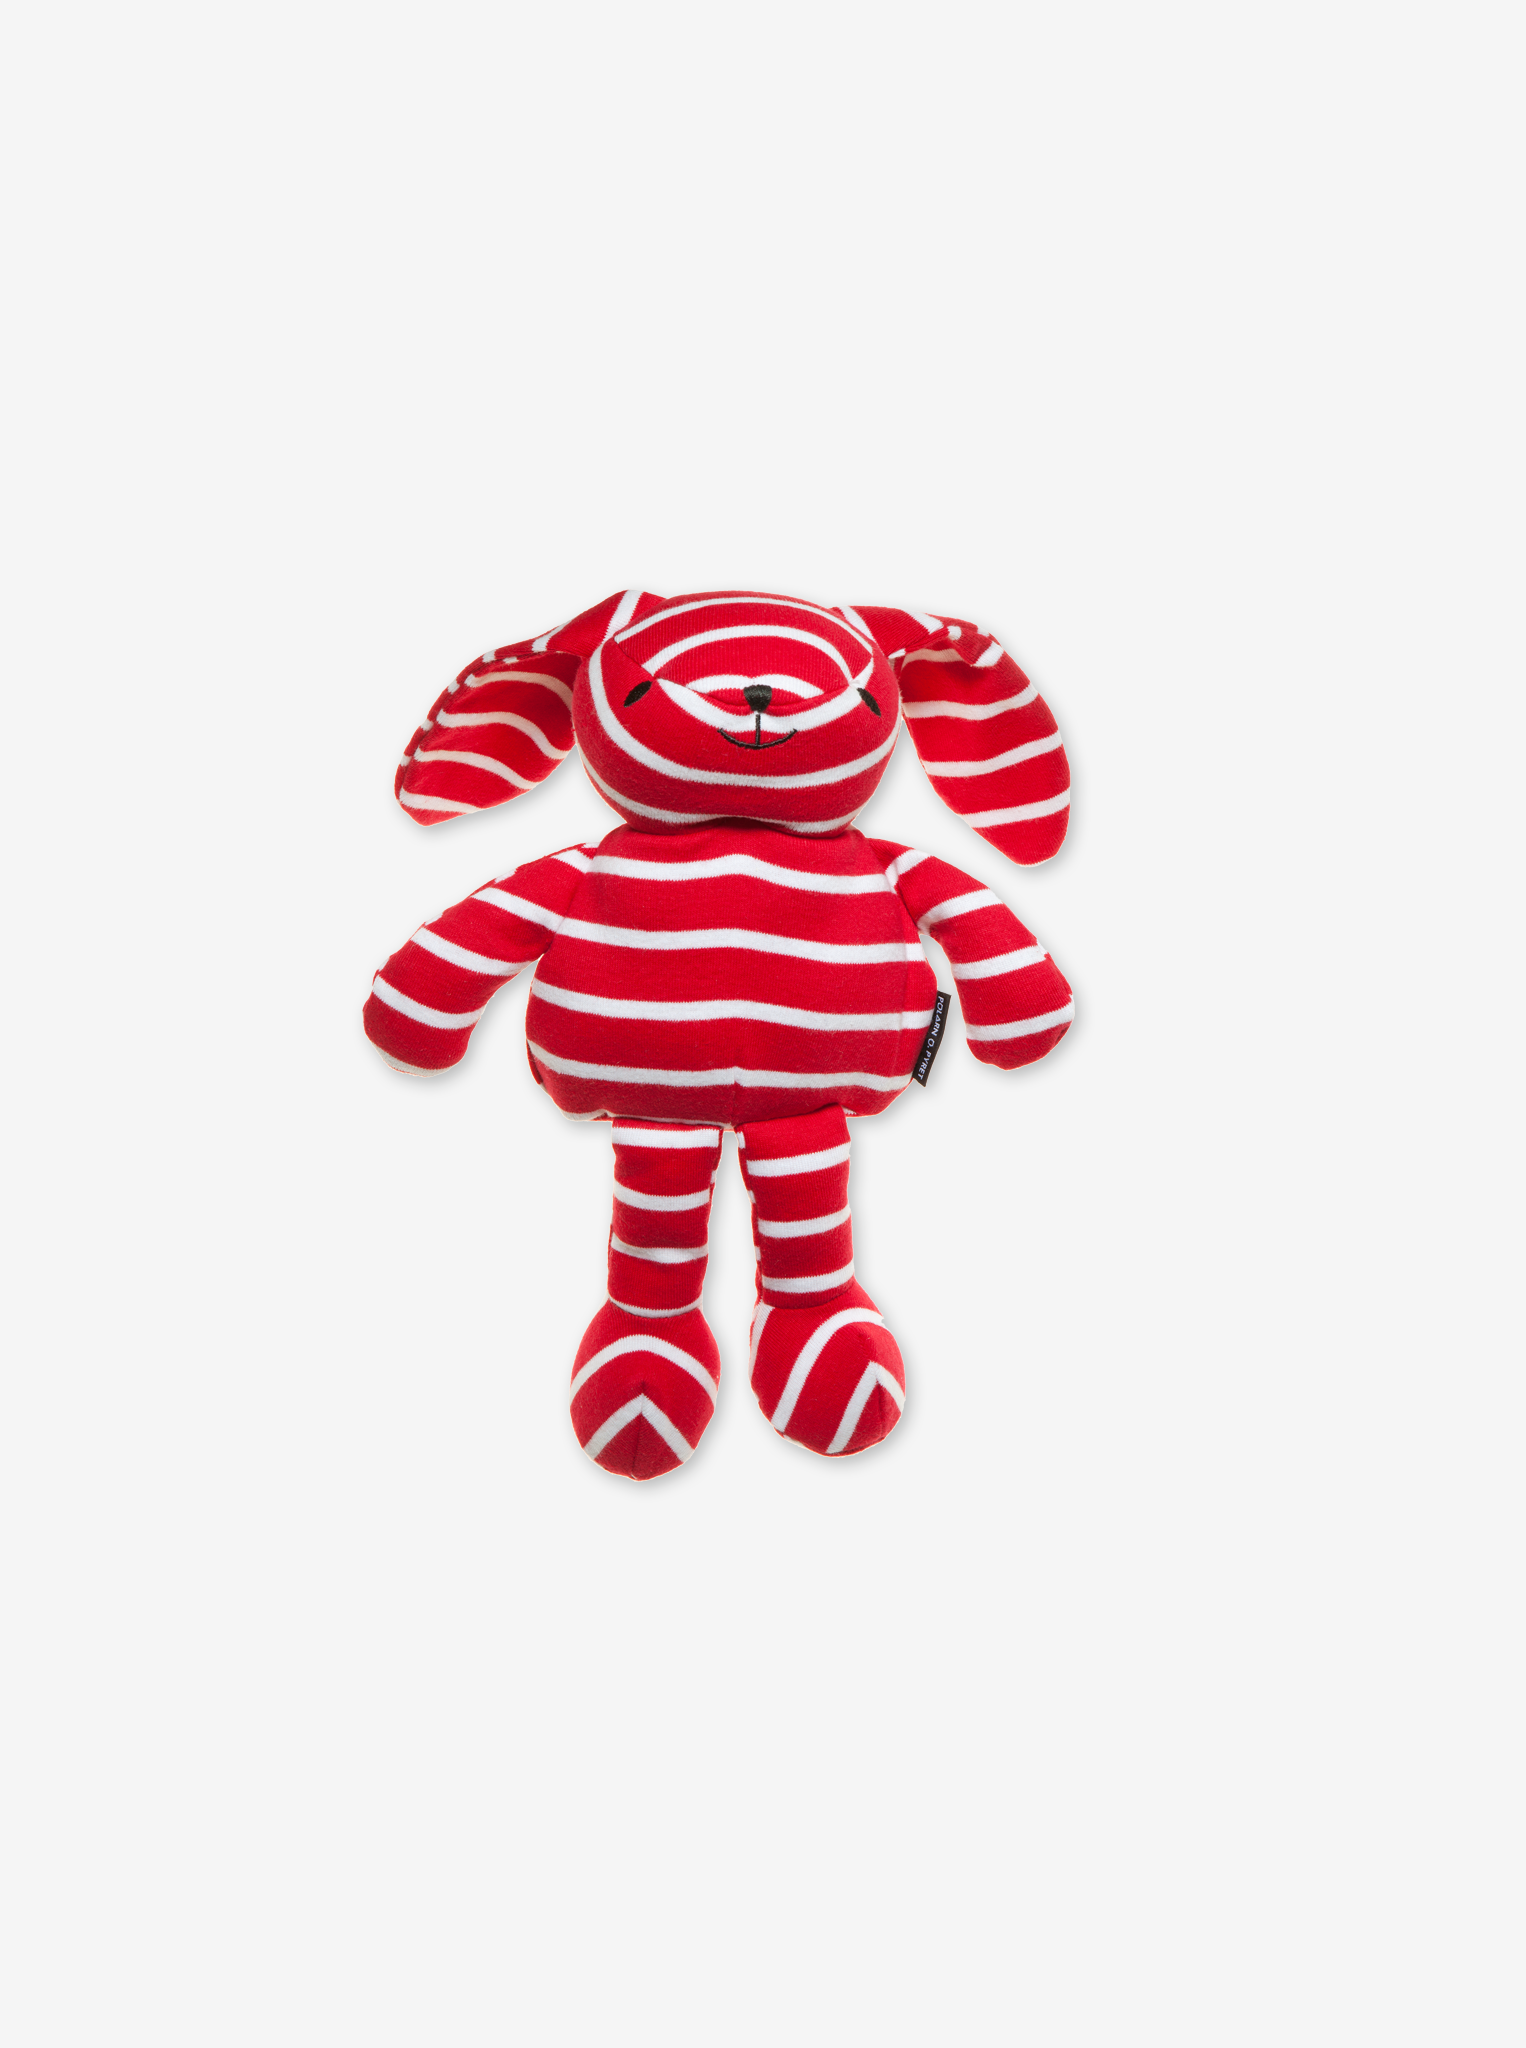 soft red and white striped PO.P bunny toy for kids